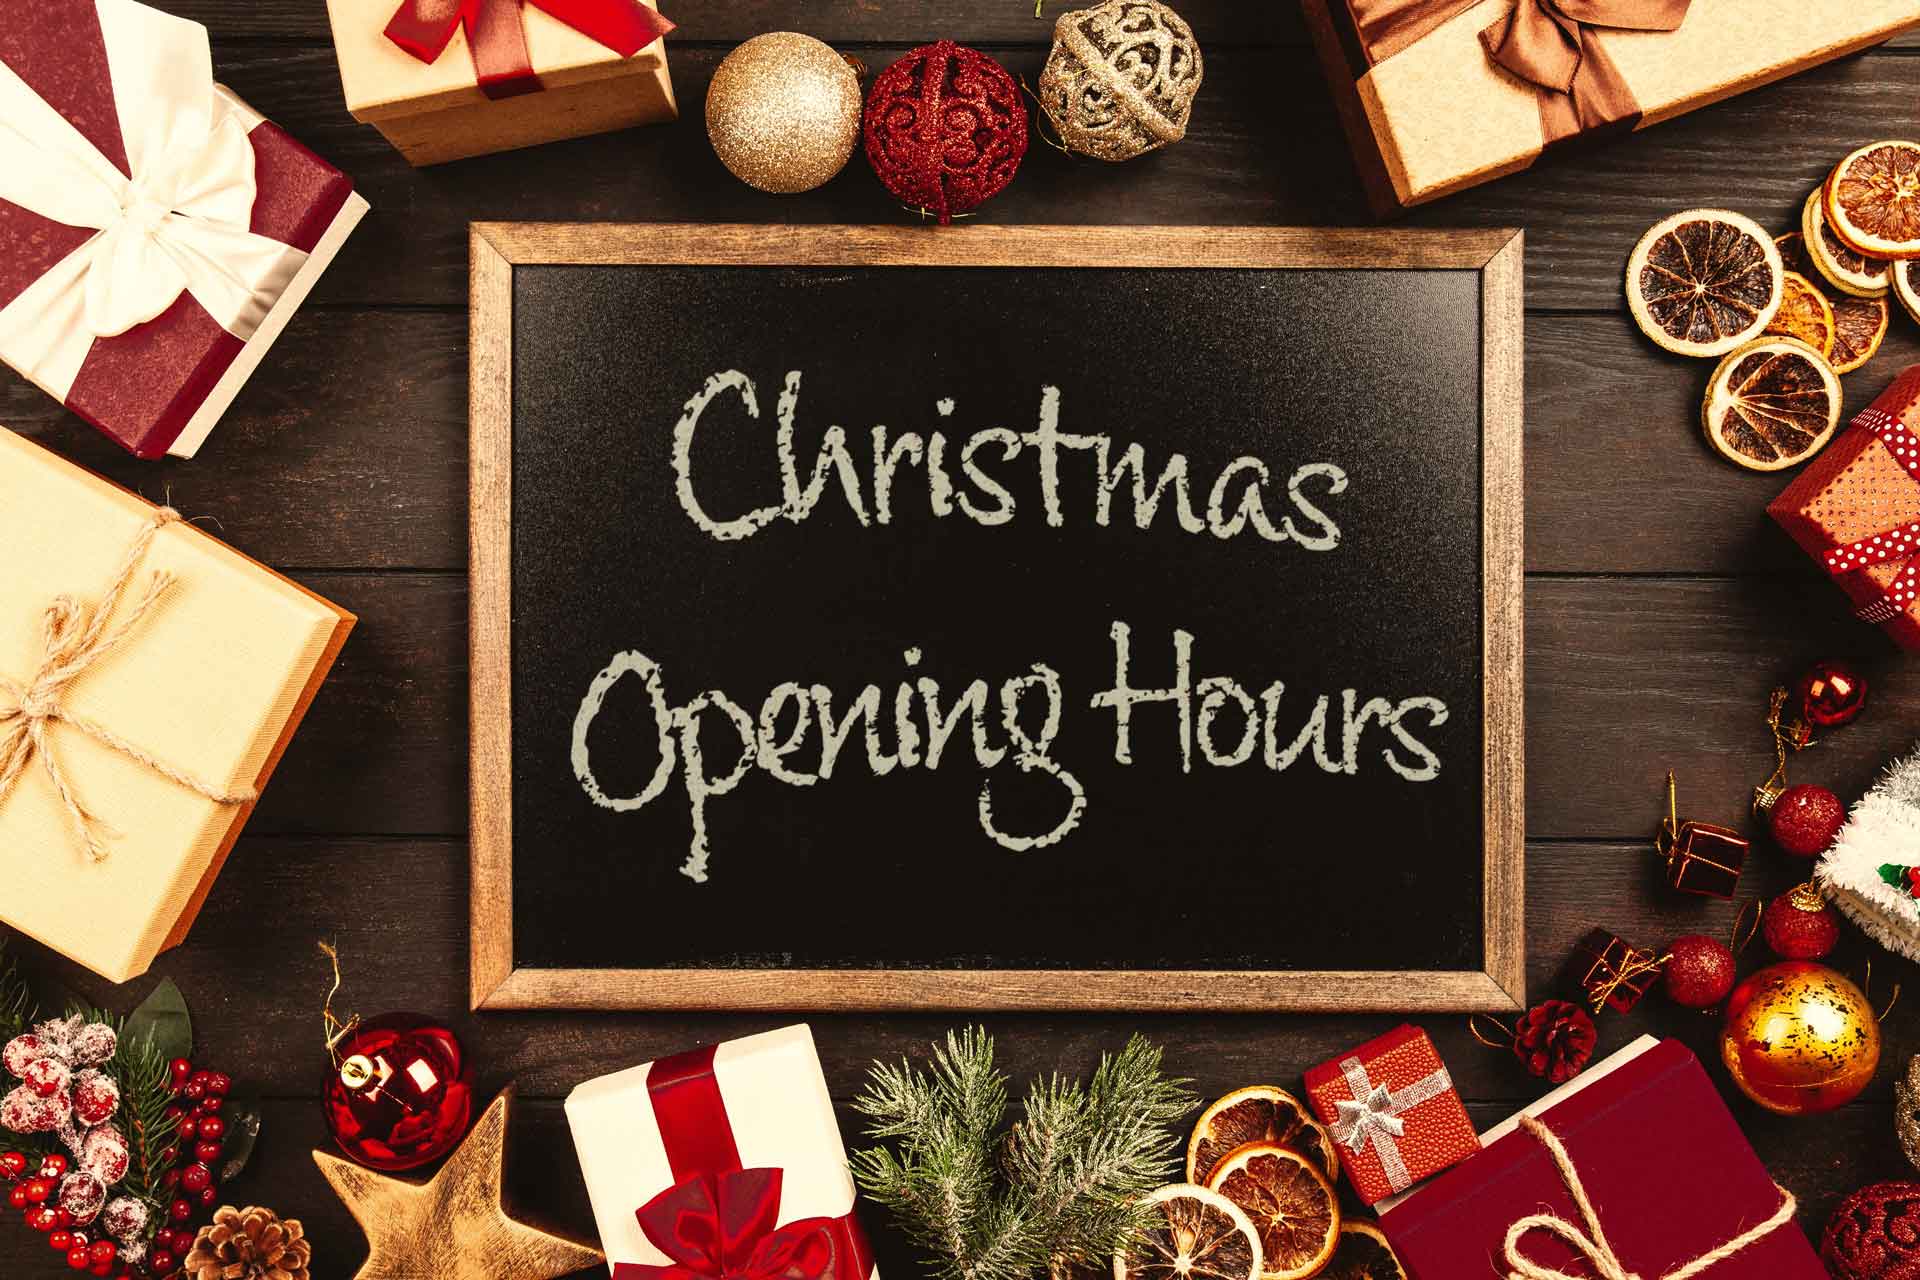 Christmas Opening Hours Wosskow Brown Solicitors